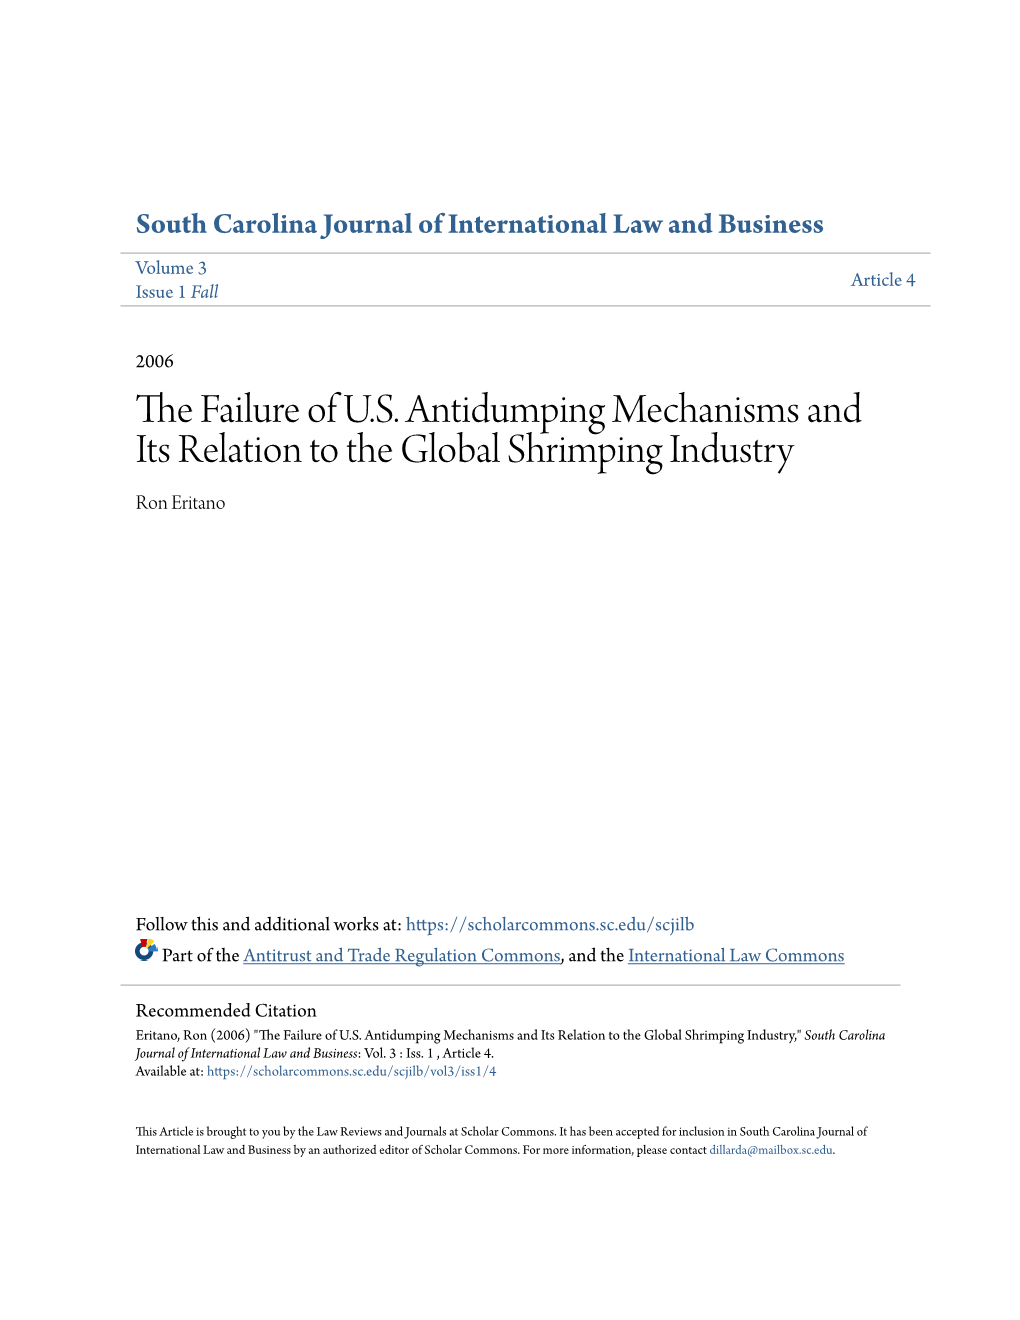 The Failure of U.S. Antidumping Mechanisms and Its Relation to the Global Shrimping Industry